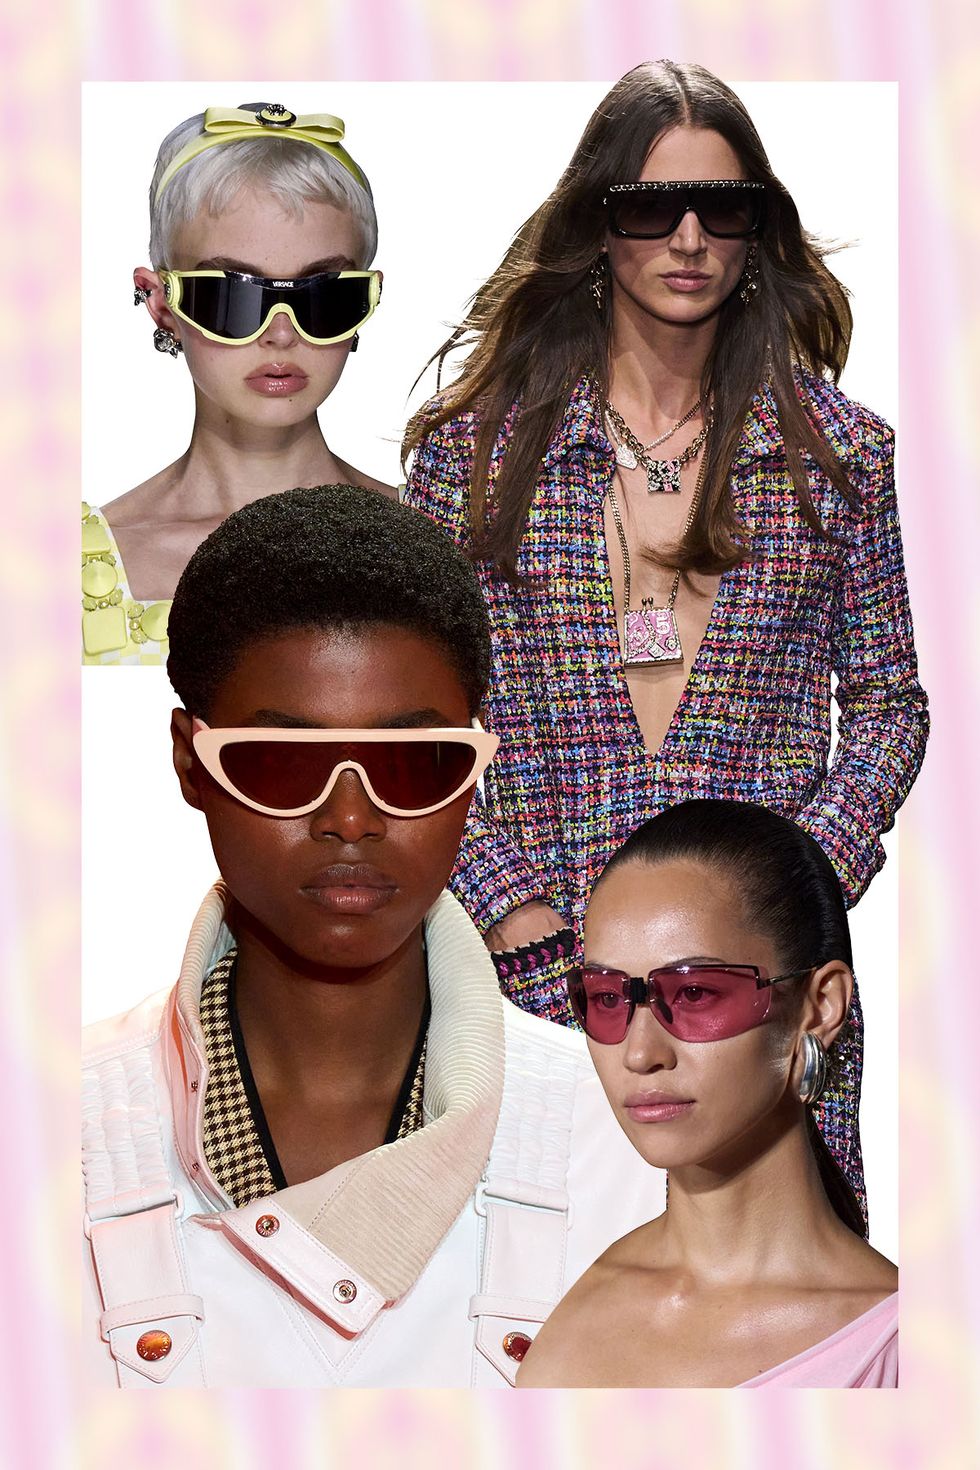 a collage of a woman wearing sunglasses